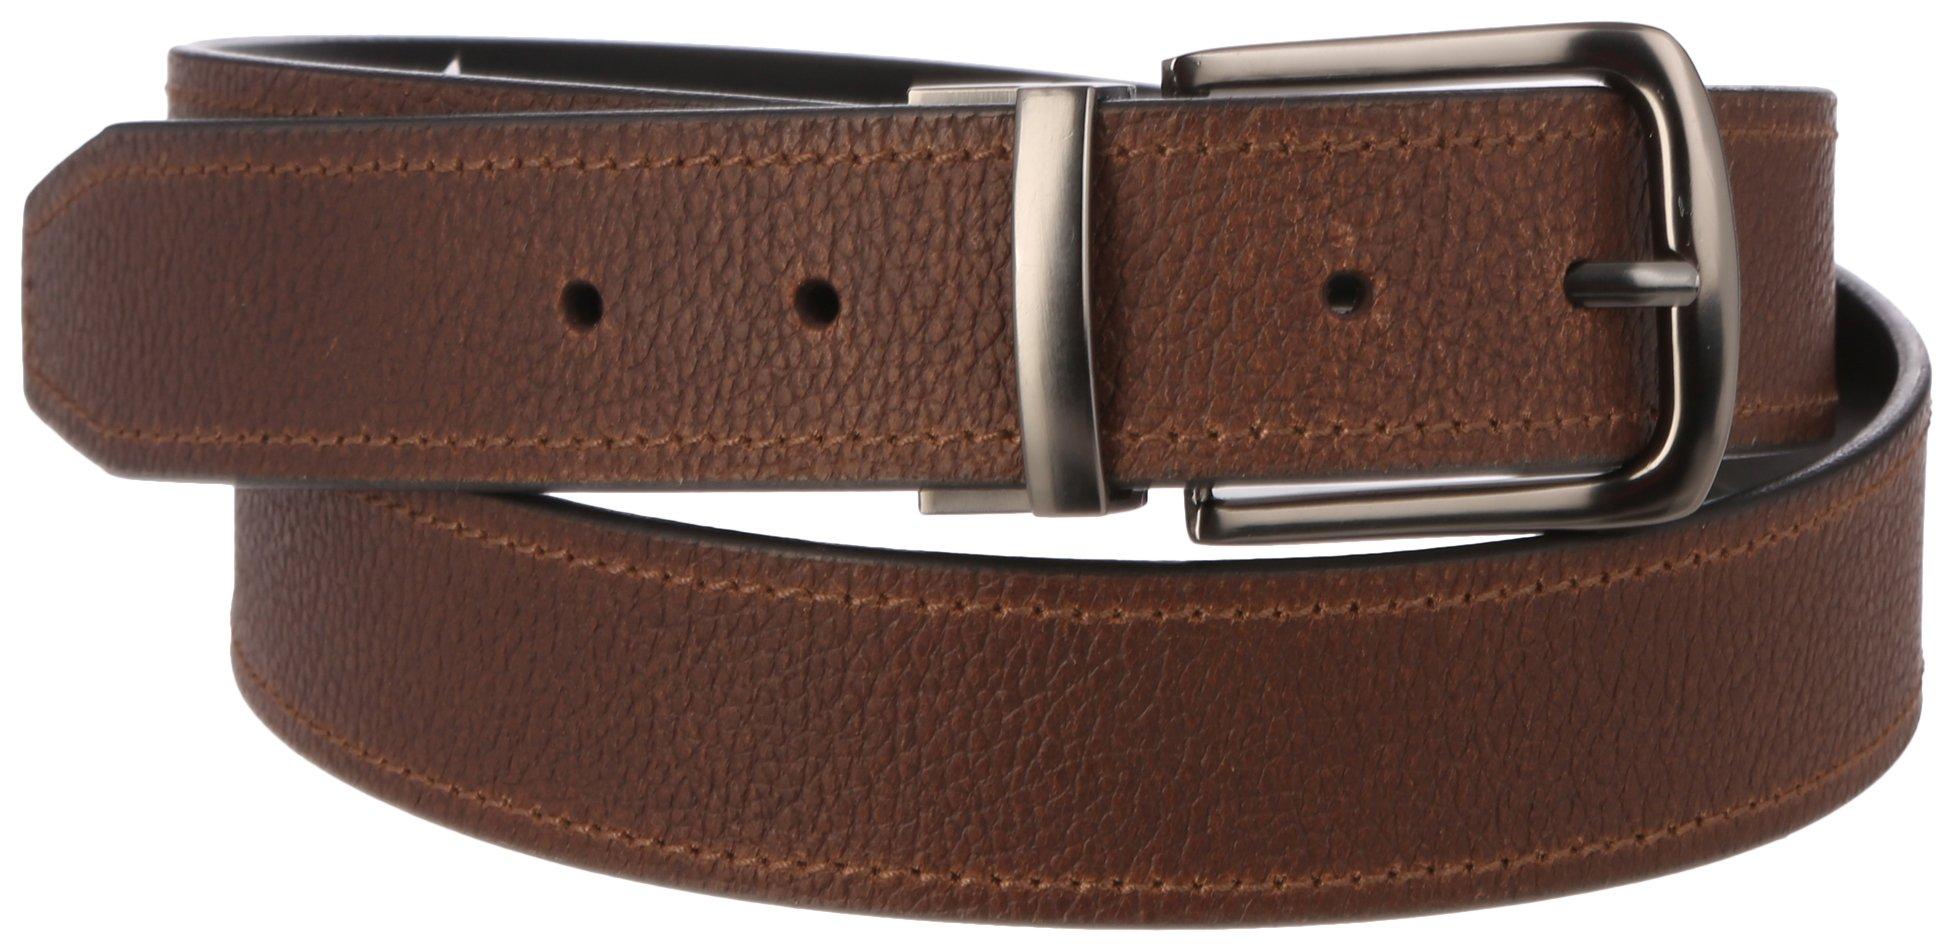 Timberland mens Leather 40mm apparel belts, Brown (Stitched), 32 US at   Men's Clothing store